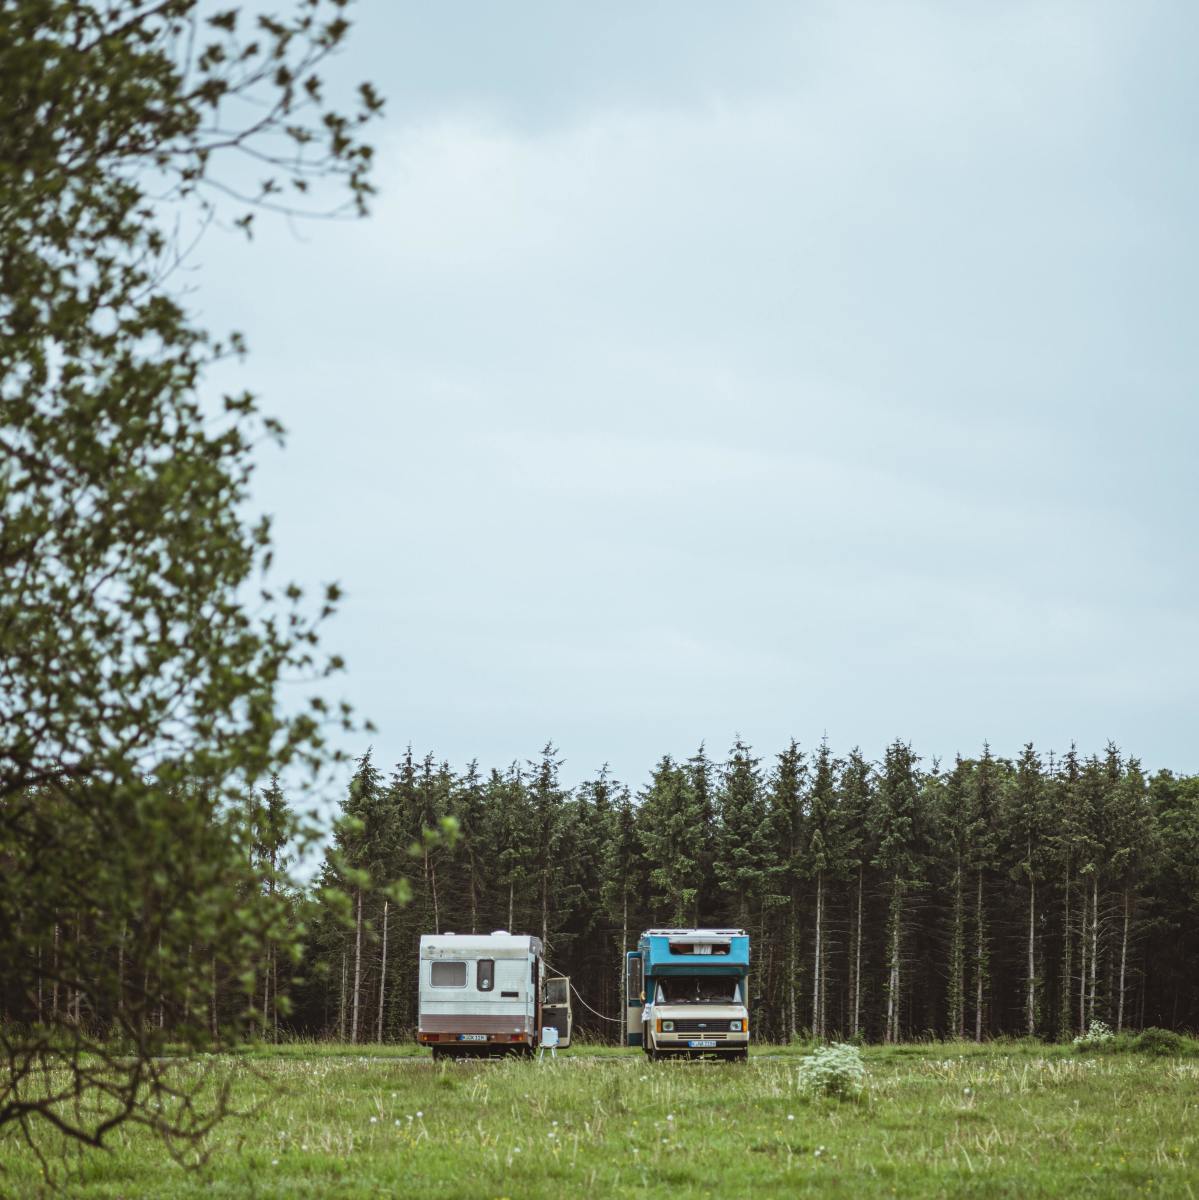 Learn why full-time RV living does not work out for some people.